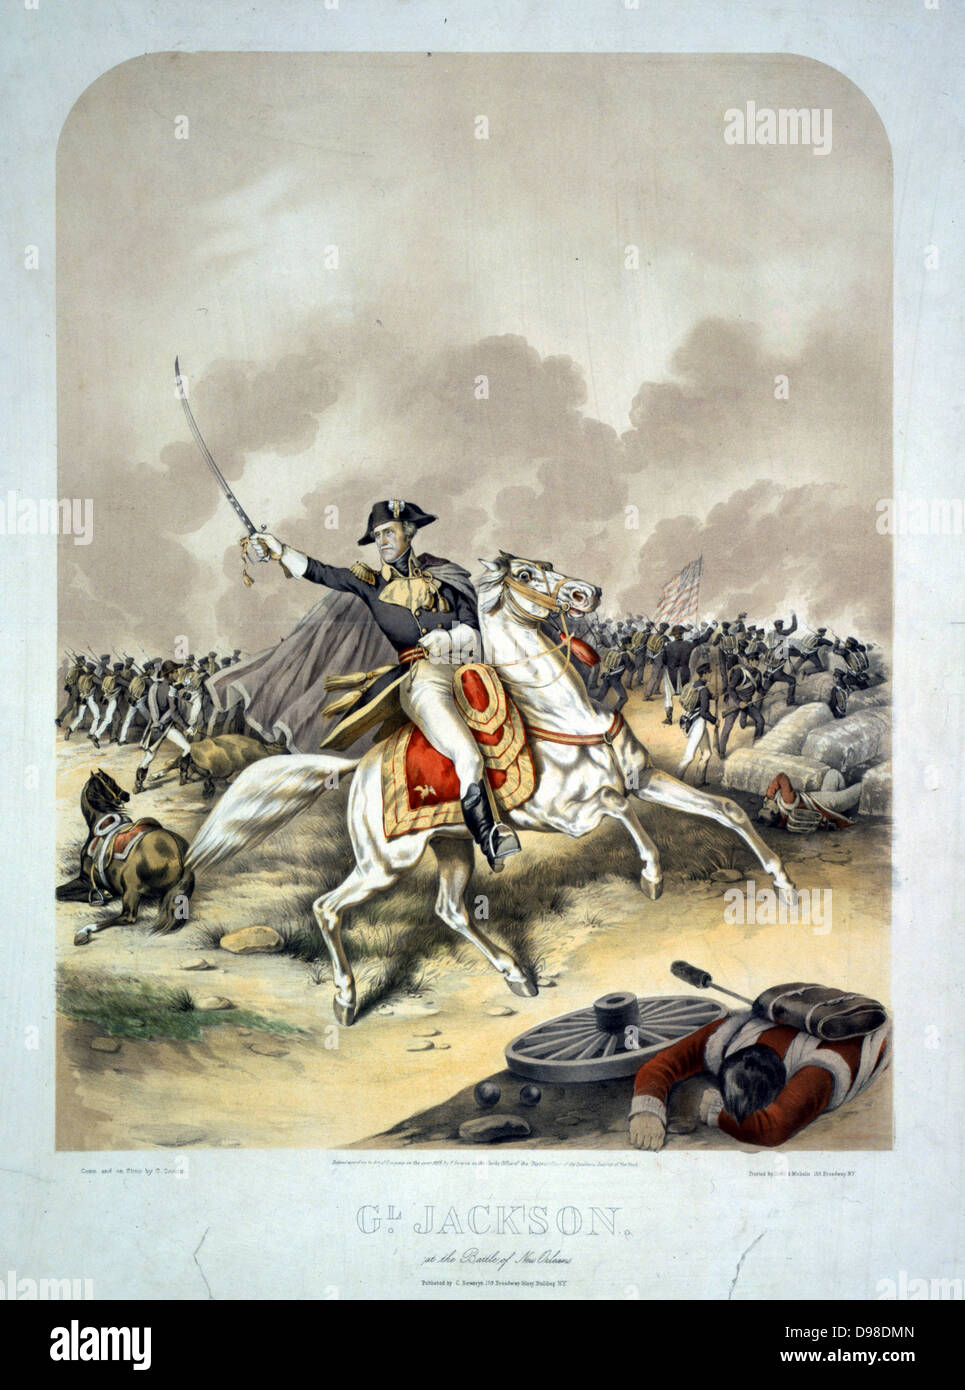 Anglo-American War 1812-1815 (War of 1812): General Andrew Jackson (1767-1845) at the Battle of New Orleans 8 January 1815, mounted on white horse, leading the American forces to victory in this, the last major battle of the war. Coloured lithograph by C Severin, c1856. Stock Photo